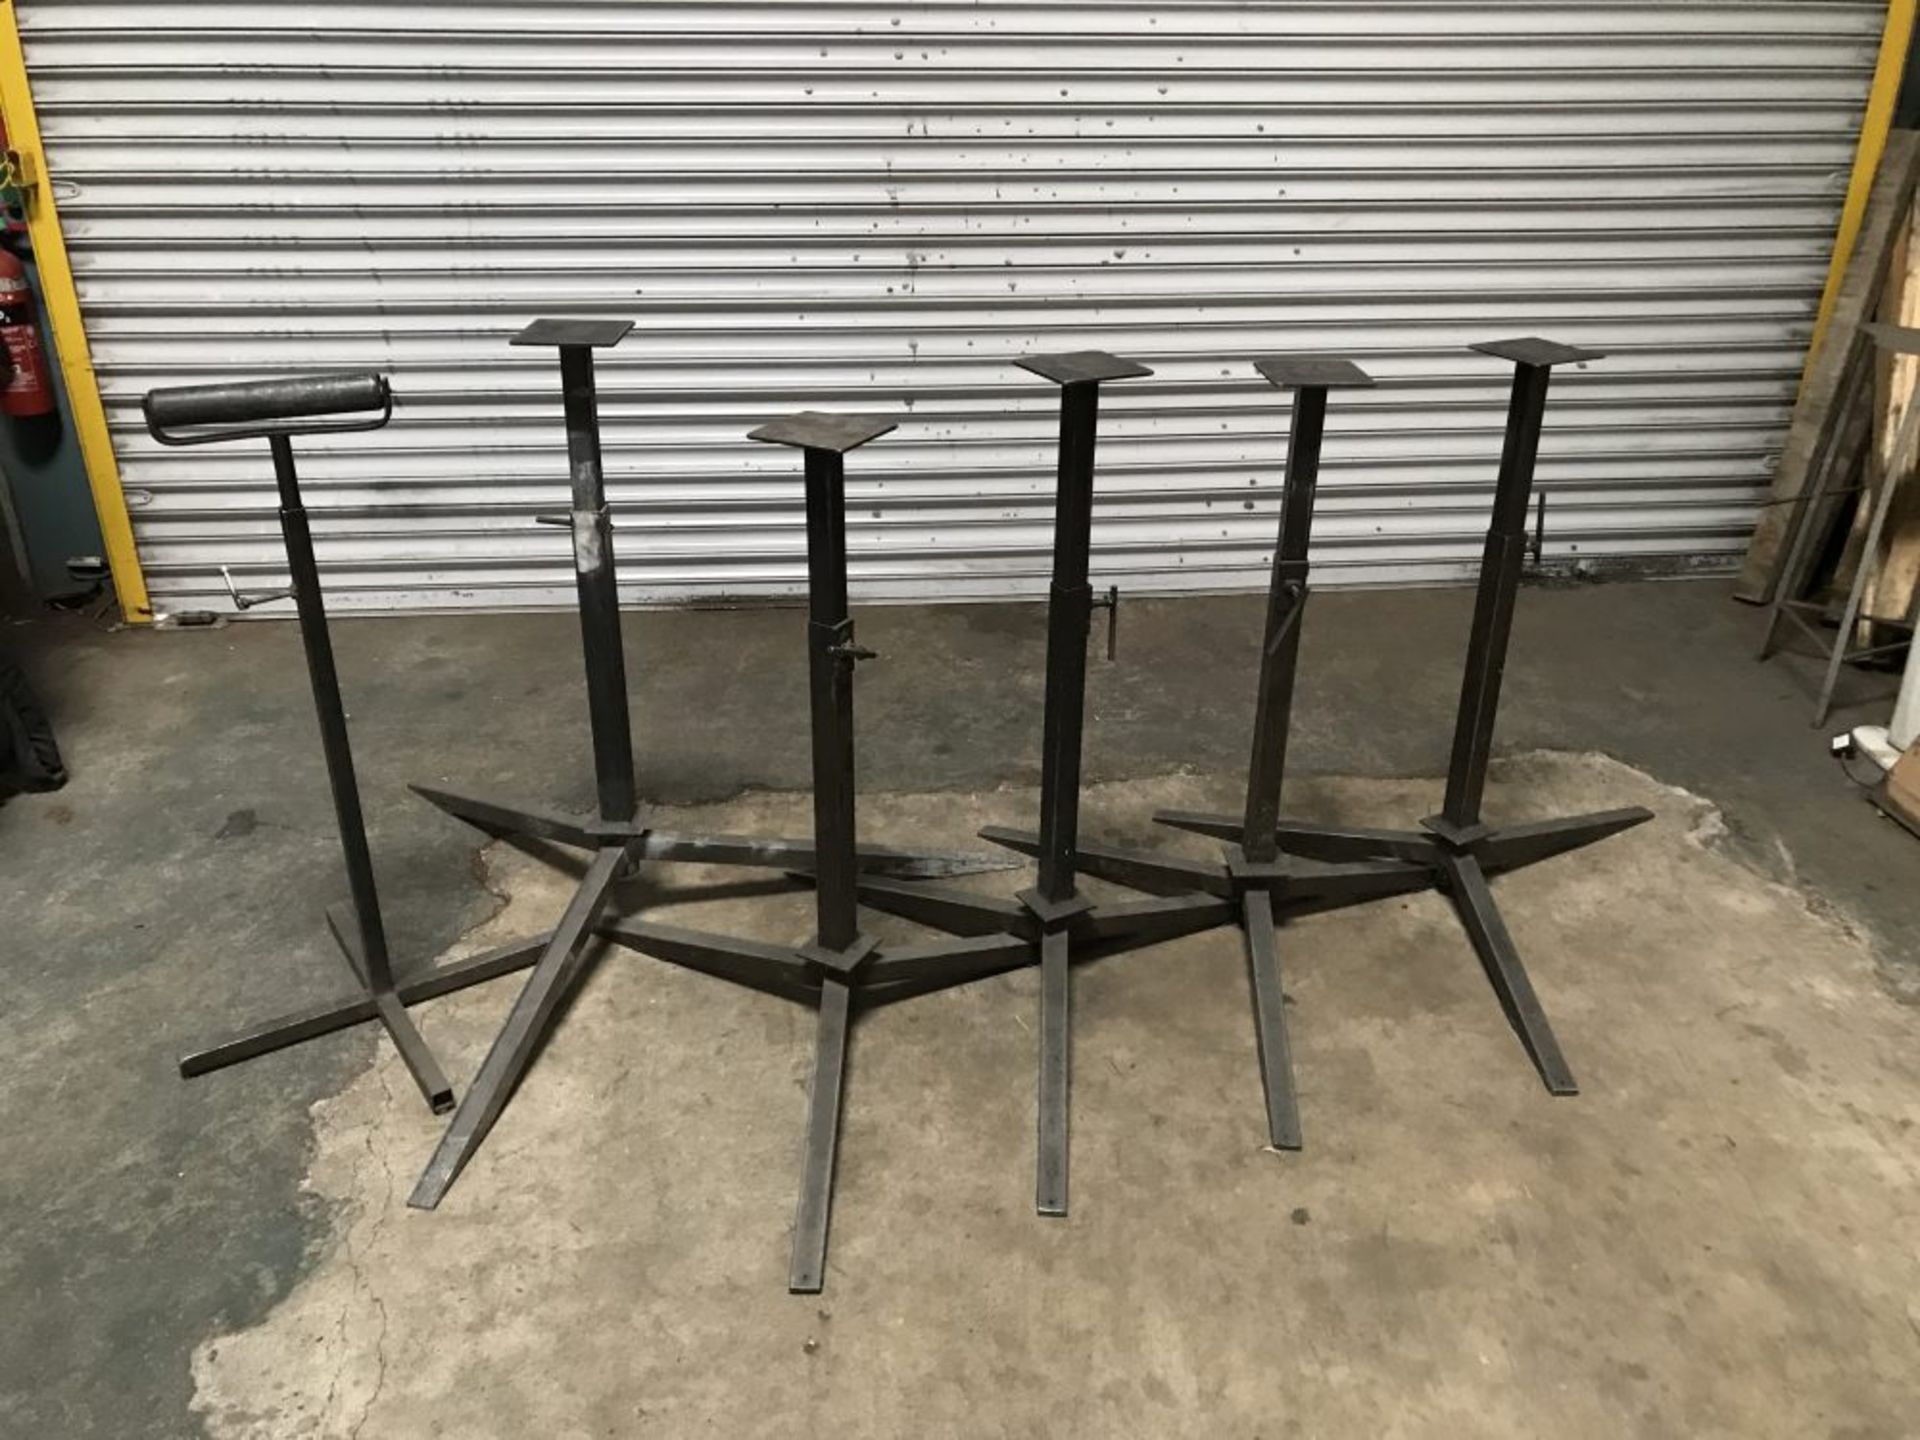 7 adjustable height heavy duty steel tripod stands and a roller stand - Image 2 of 2